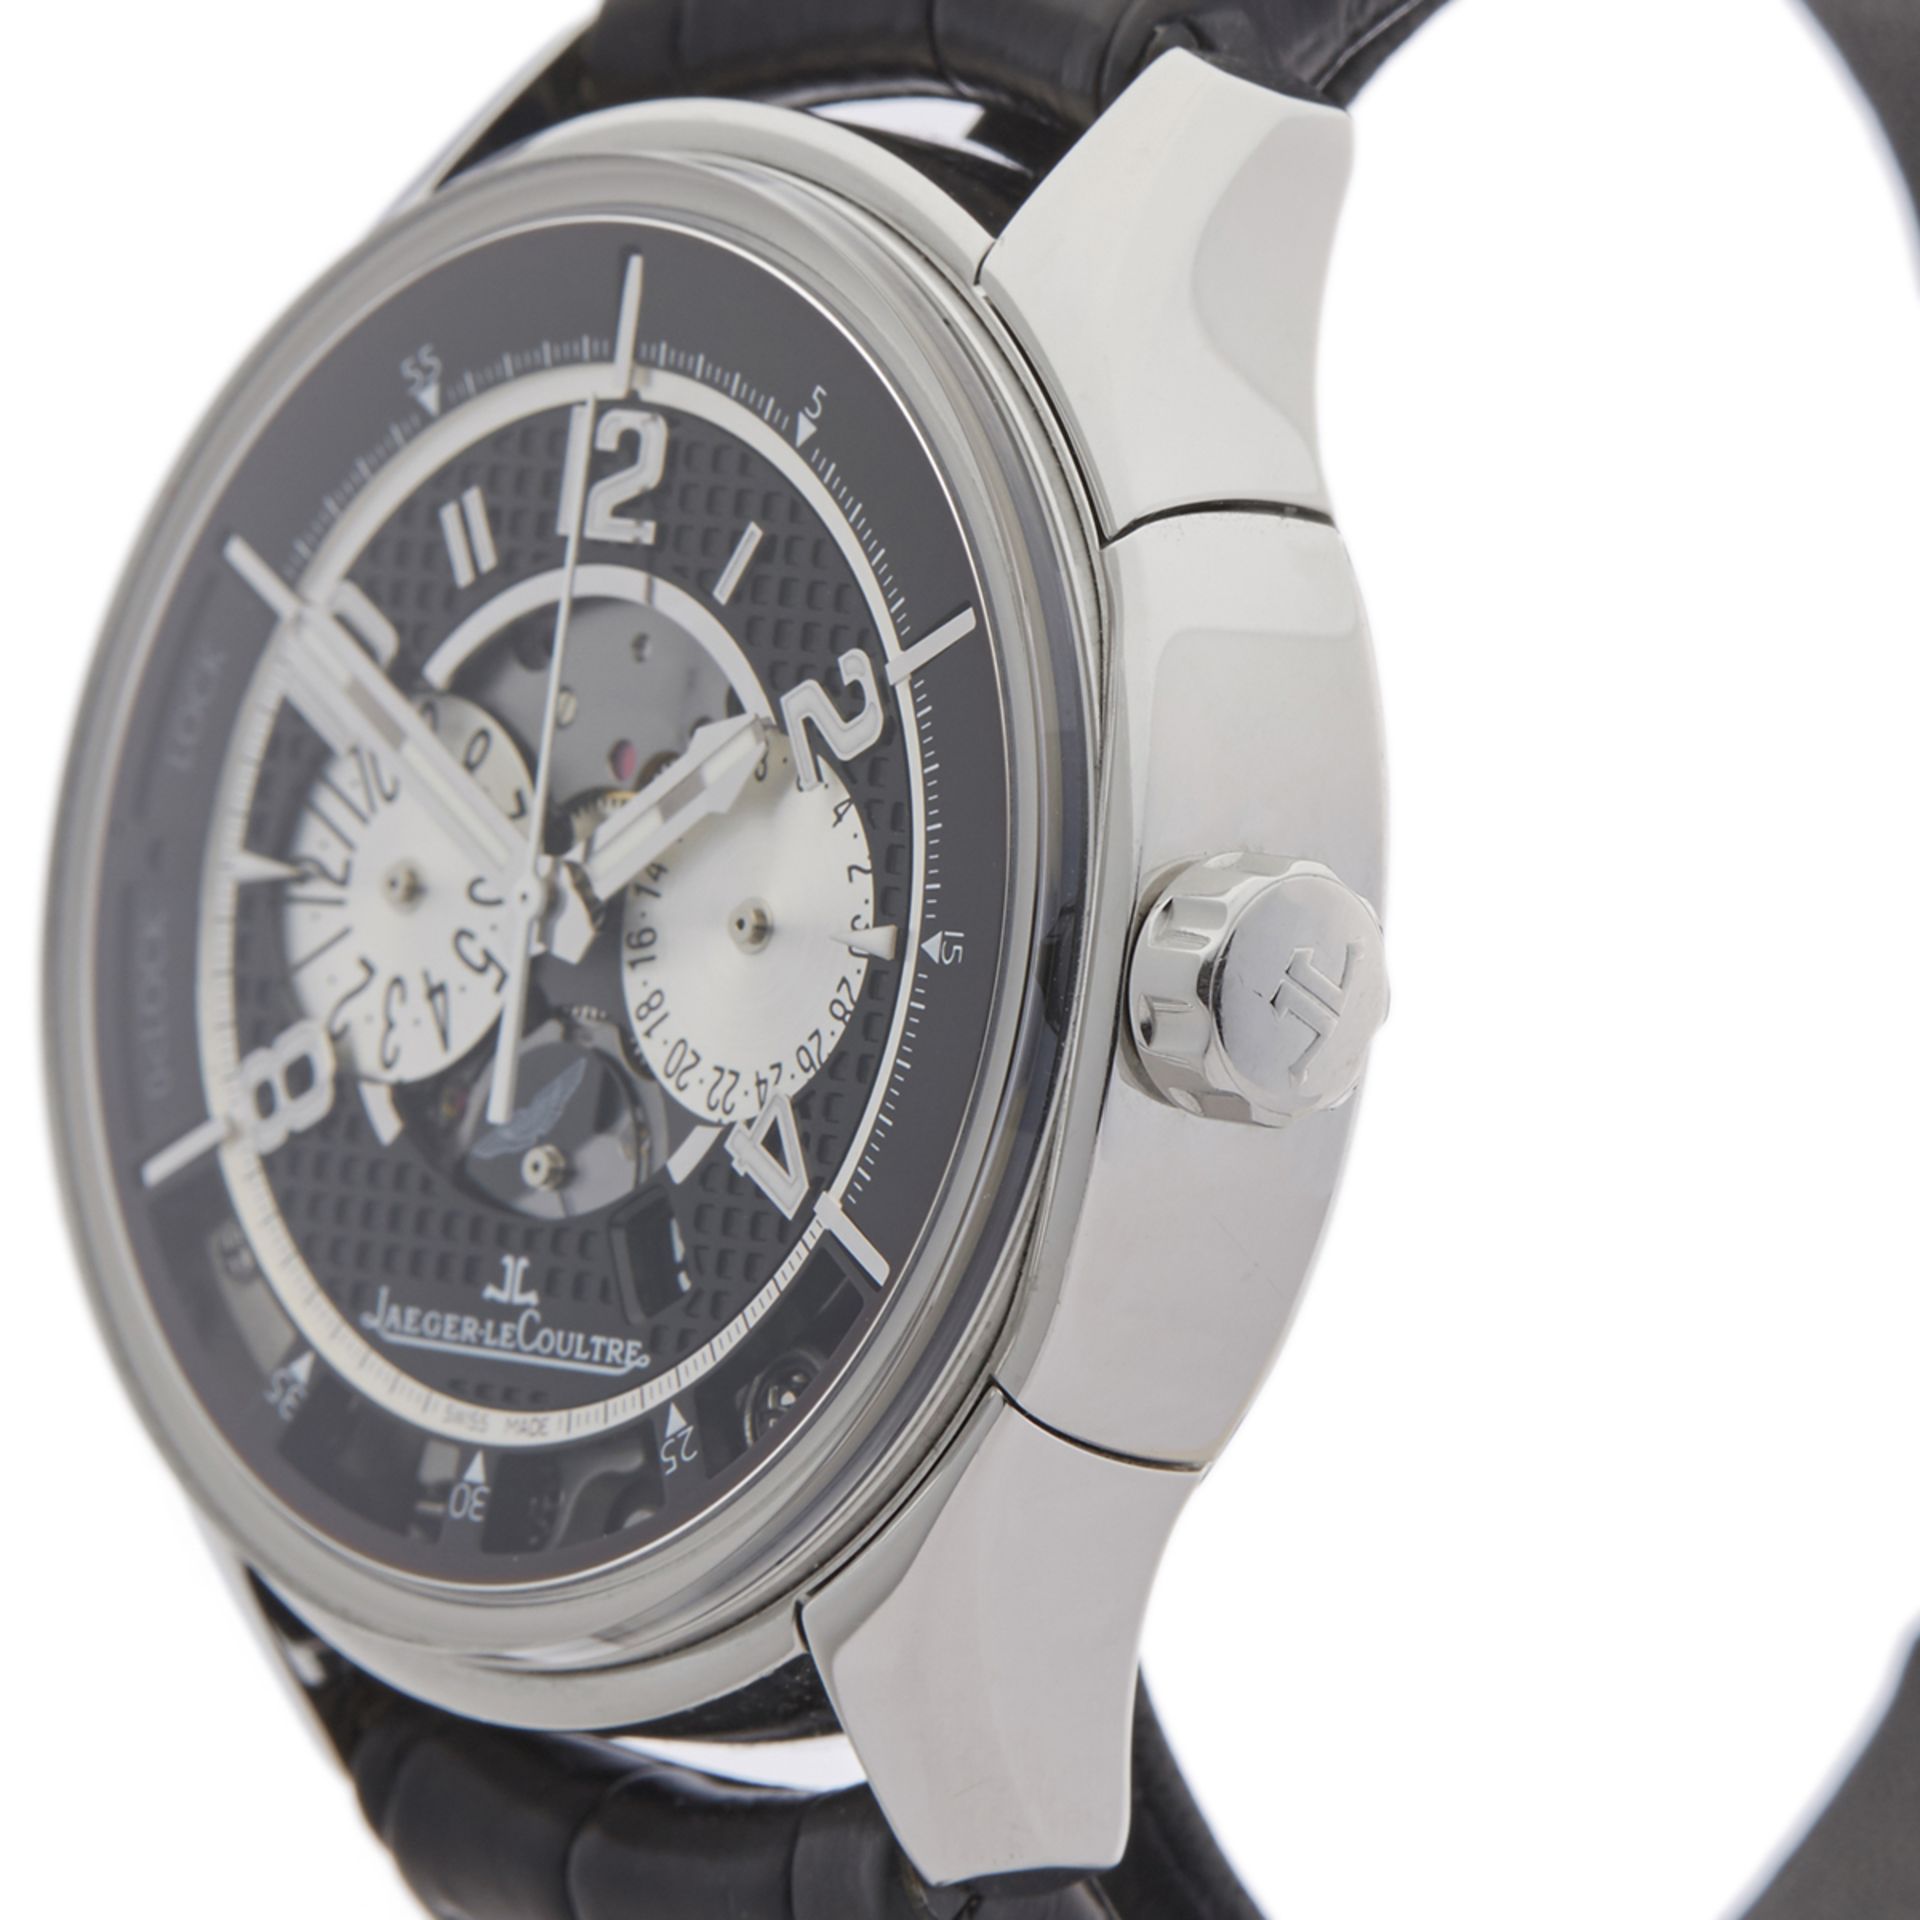 Jaeger-LeCoultre Amvox Chronograph 44mm Stainless Steel - 192.8.25 - Image 4 of 9